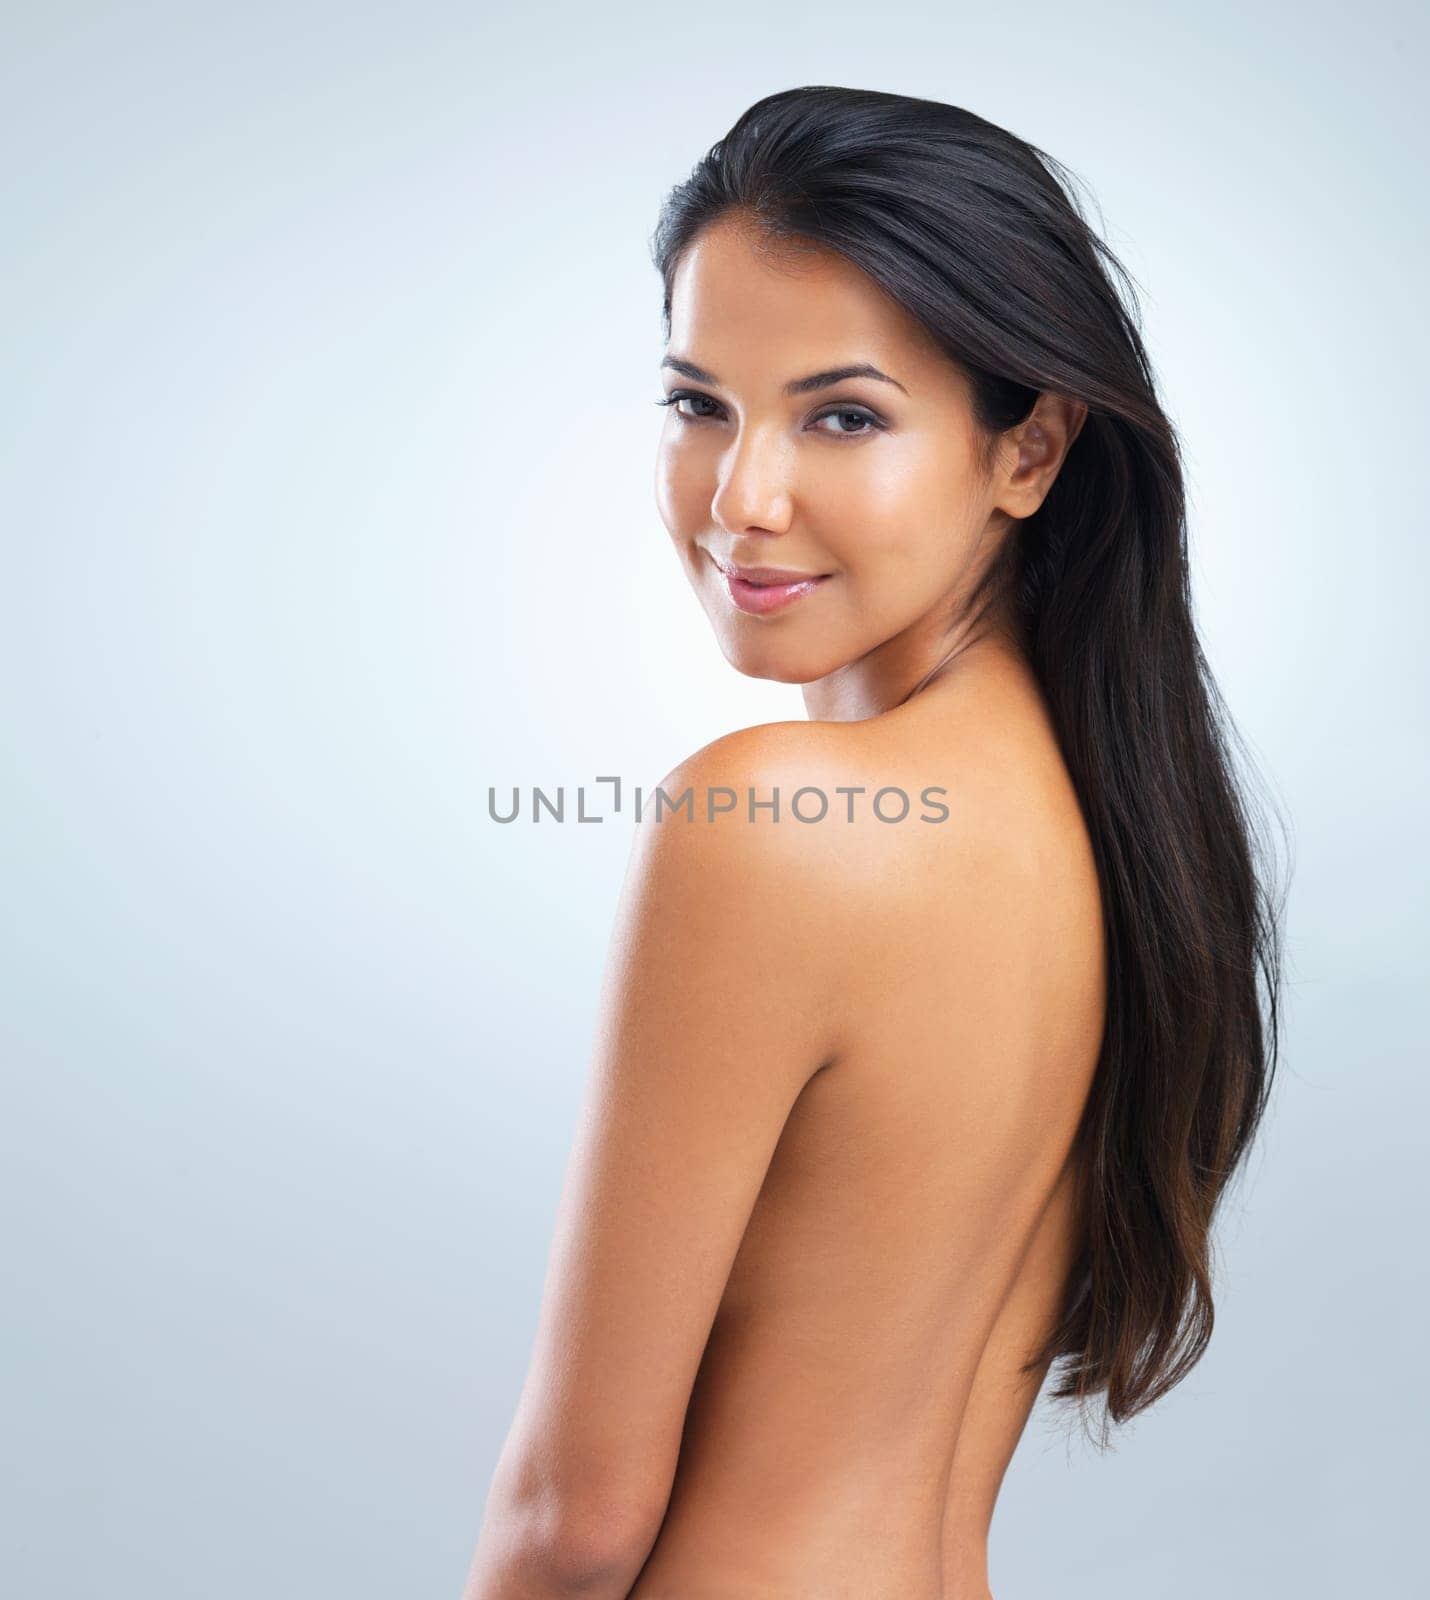 Woman, beauty and hair with cosmetics, portrait of model in studio with shine and keratin treatment on grey background. Haircare, cosmetology and touching skin for wellness with texture and growth.